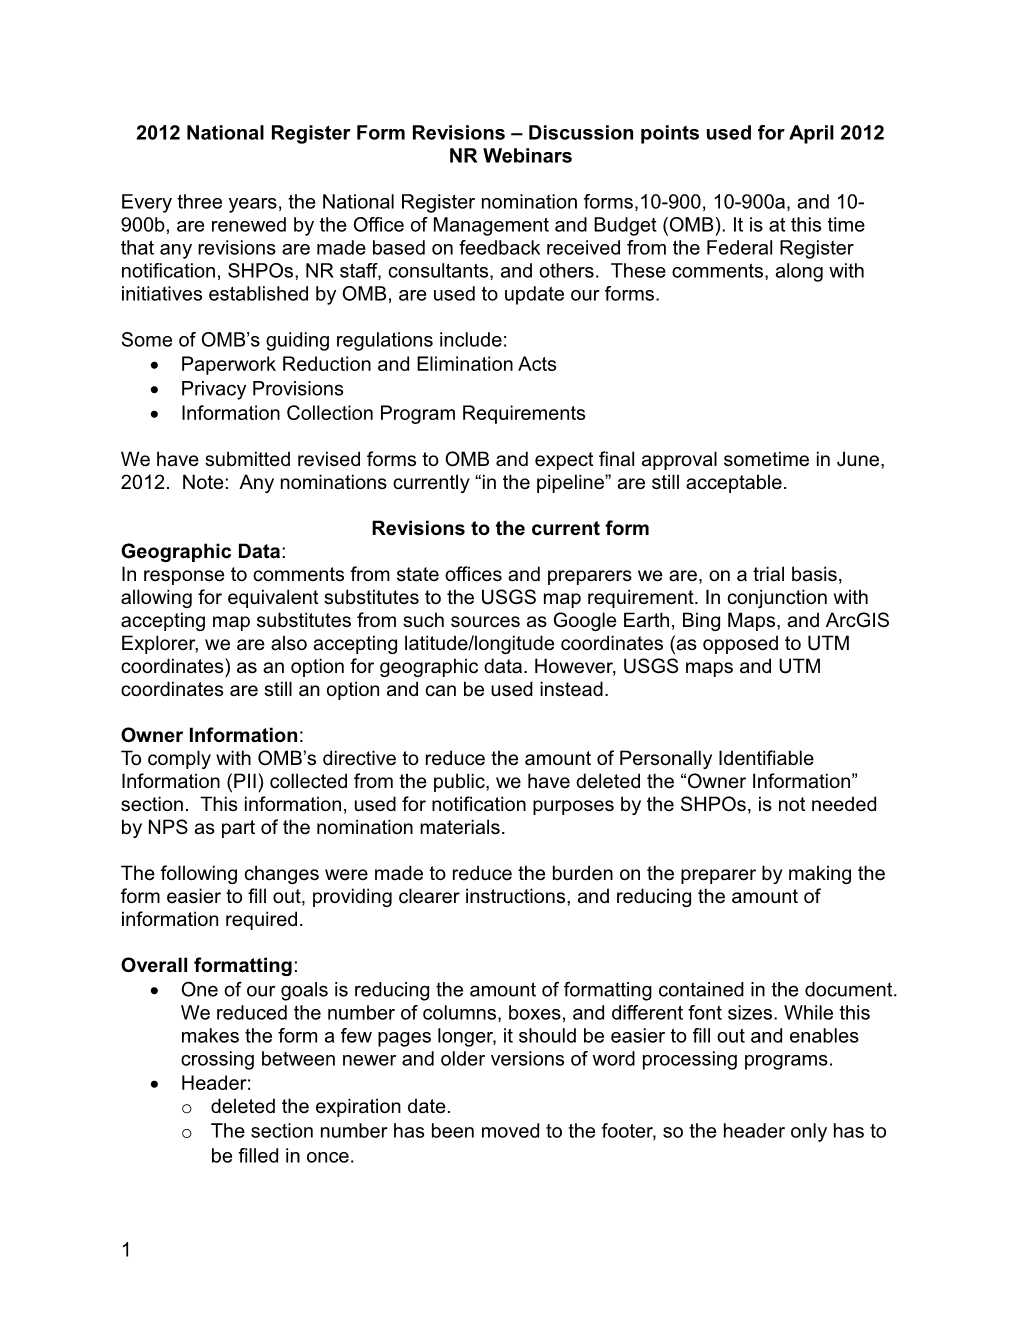 2012 National Register Form Revisions Discussion Points Used for April 2012 NR Webinars